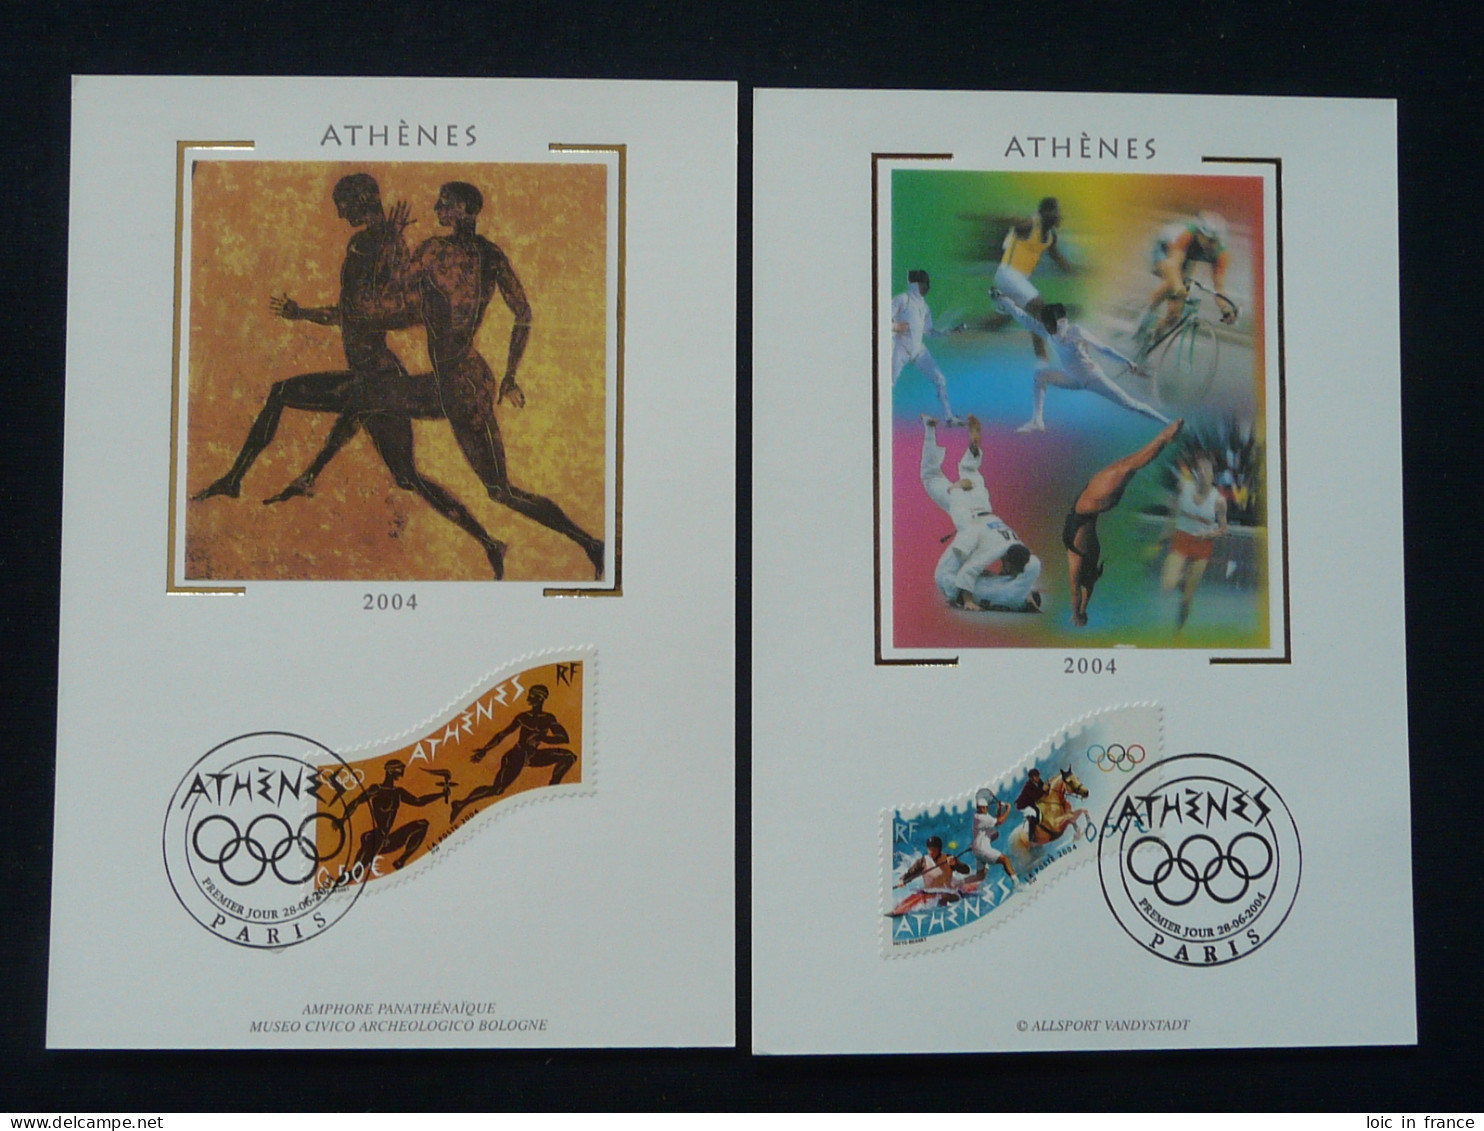 Carte Maximum Card (x2) Jeux Olympiques Athens Olympic Games France 2004 - Verano 2004: Atenas